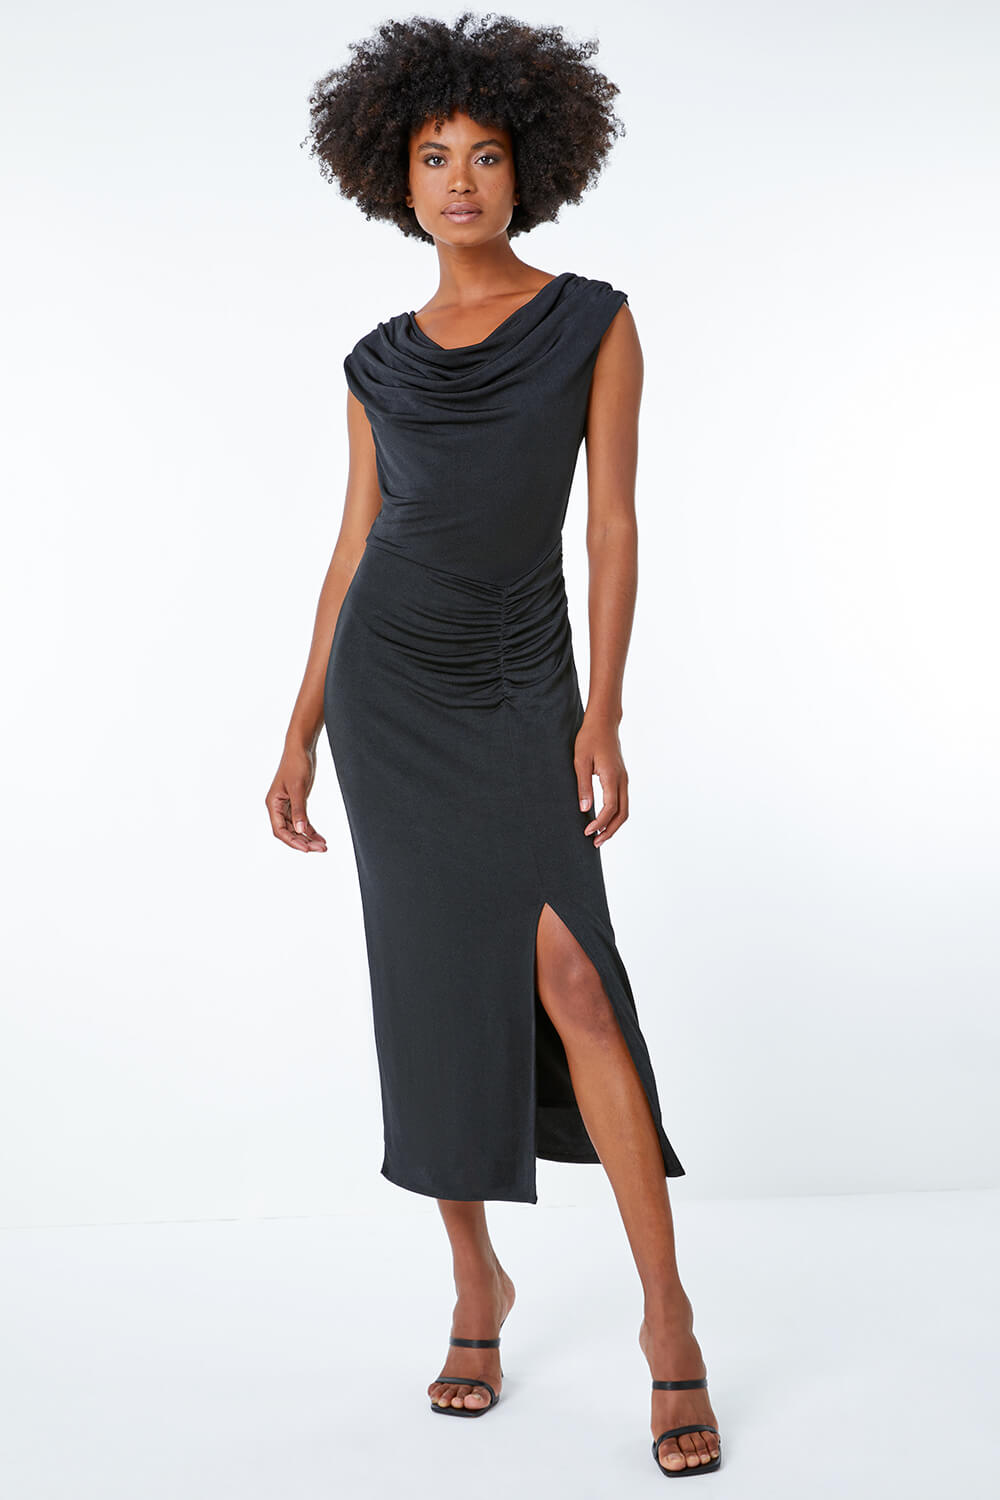 Black Cowl Neck Ruched Midi Dress, Image 2 of 5